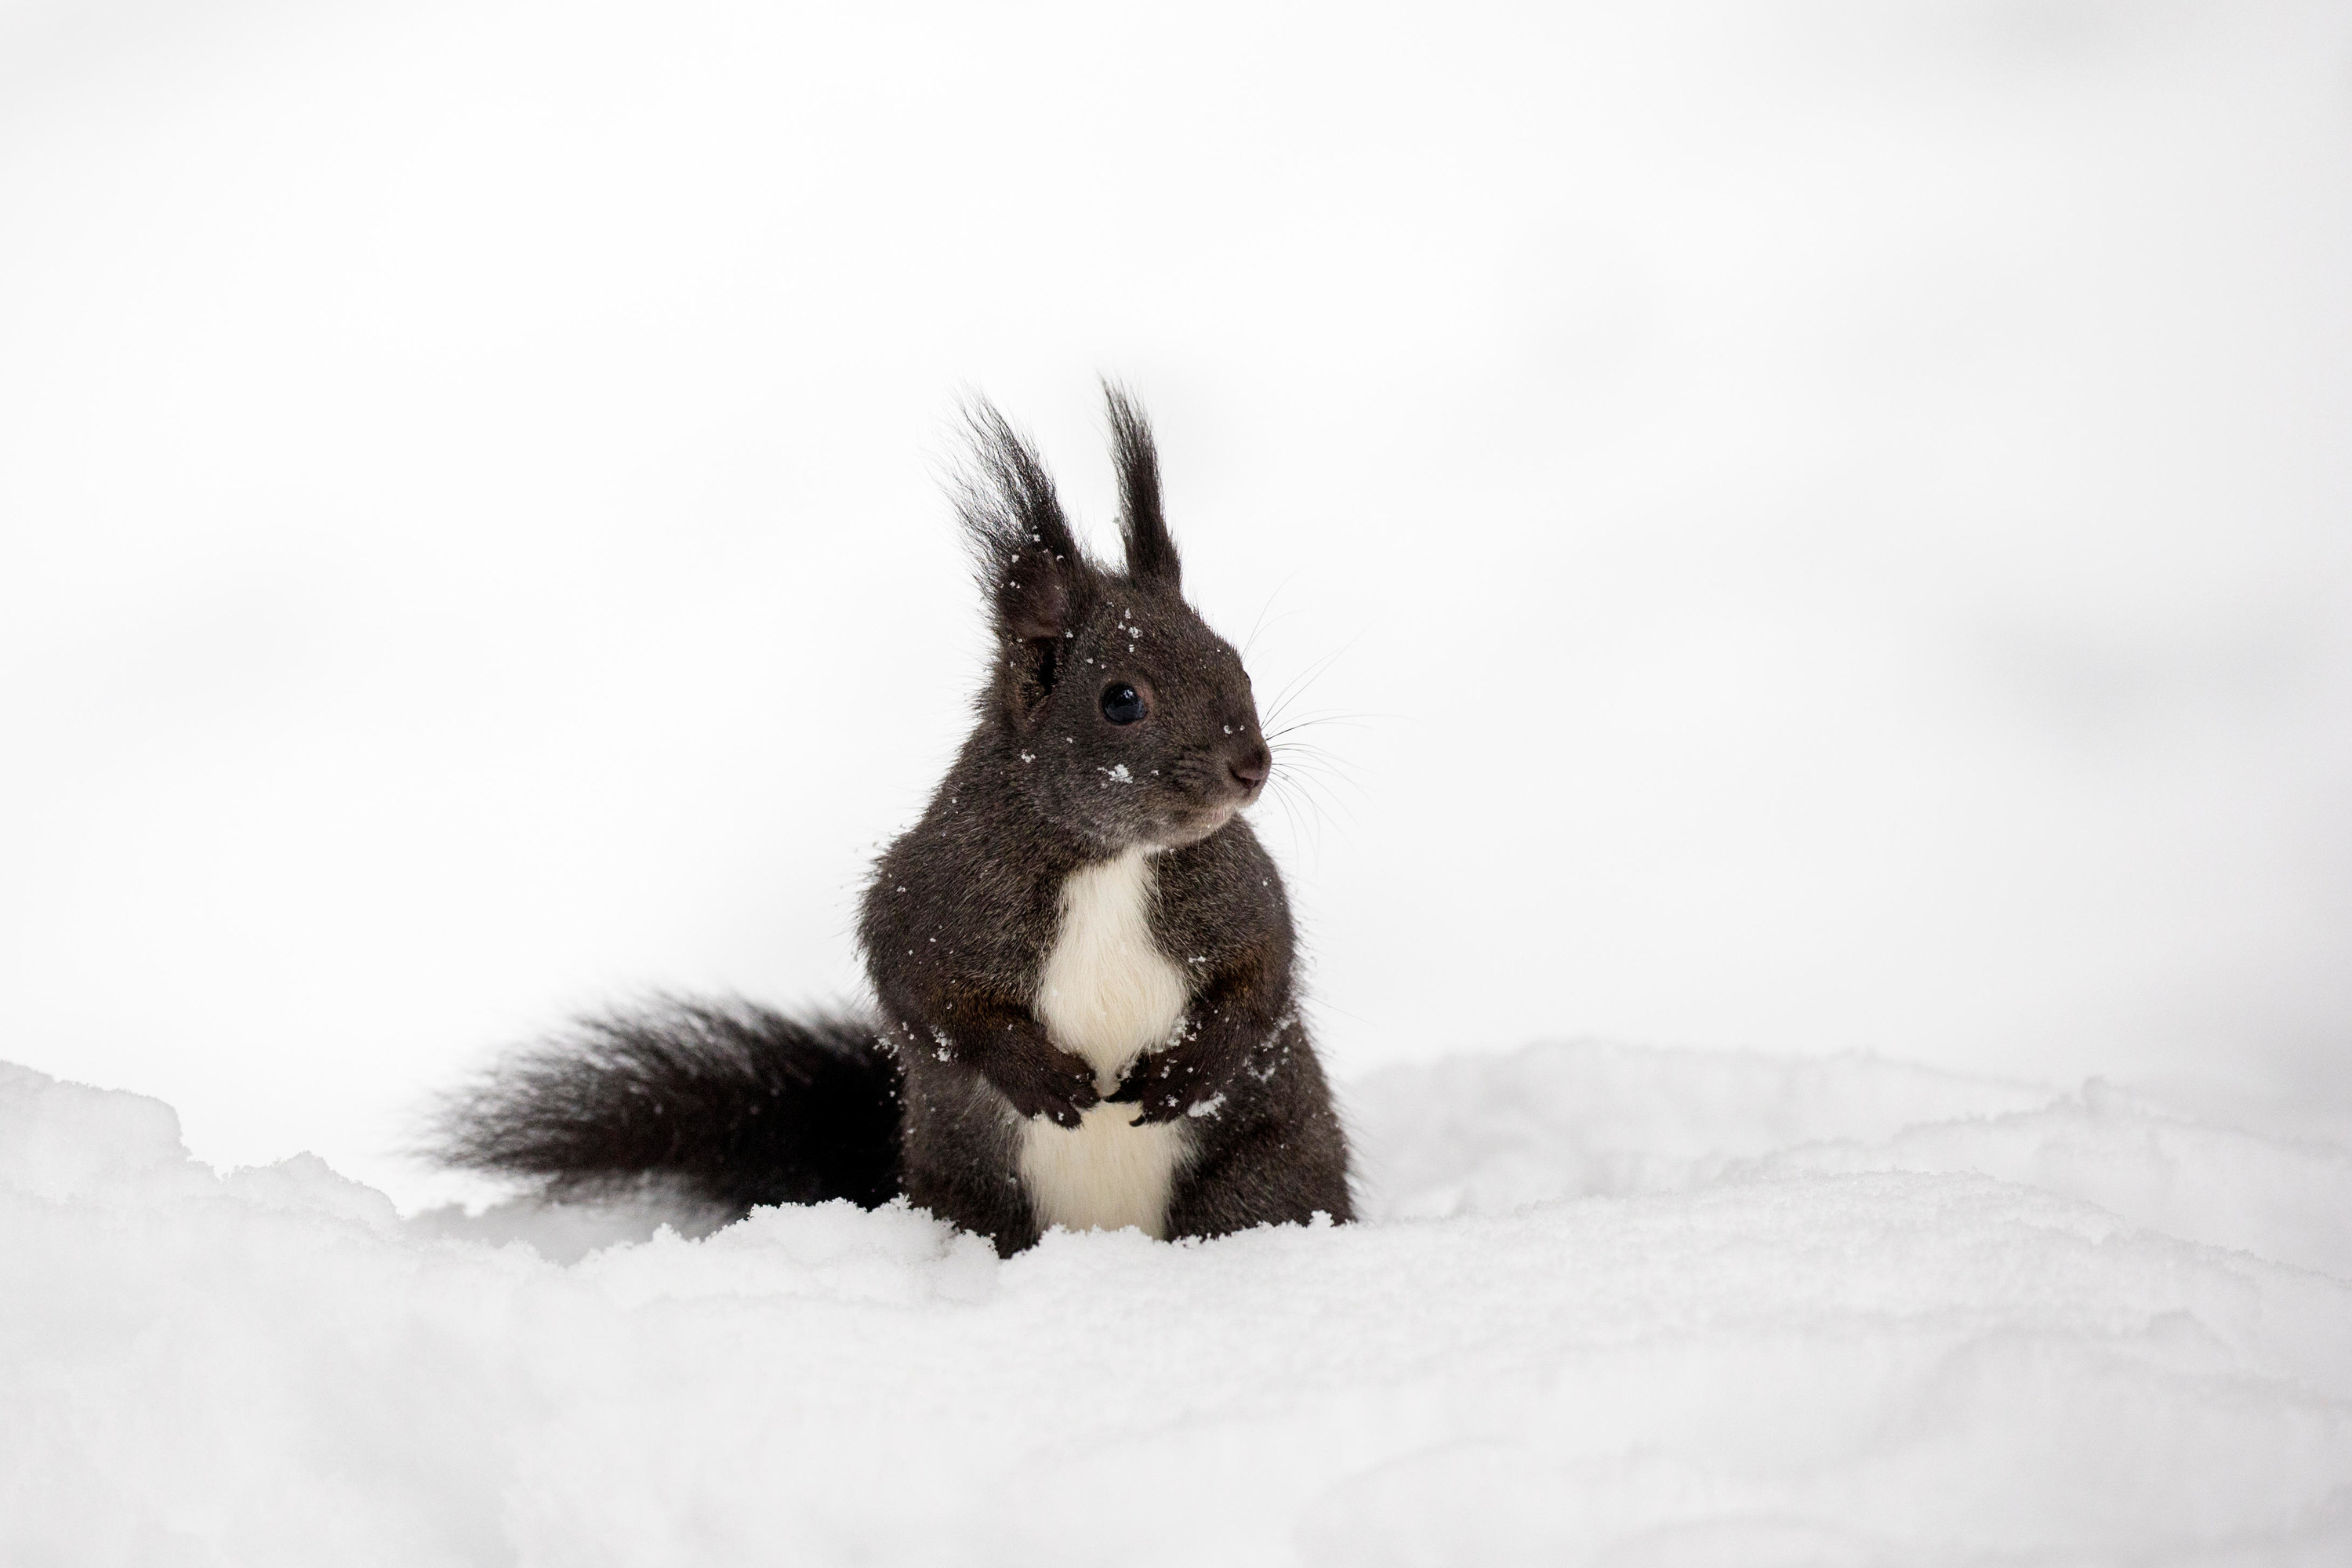 squirrel in the snow with long ear hair